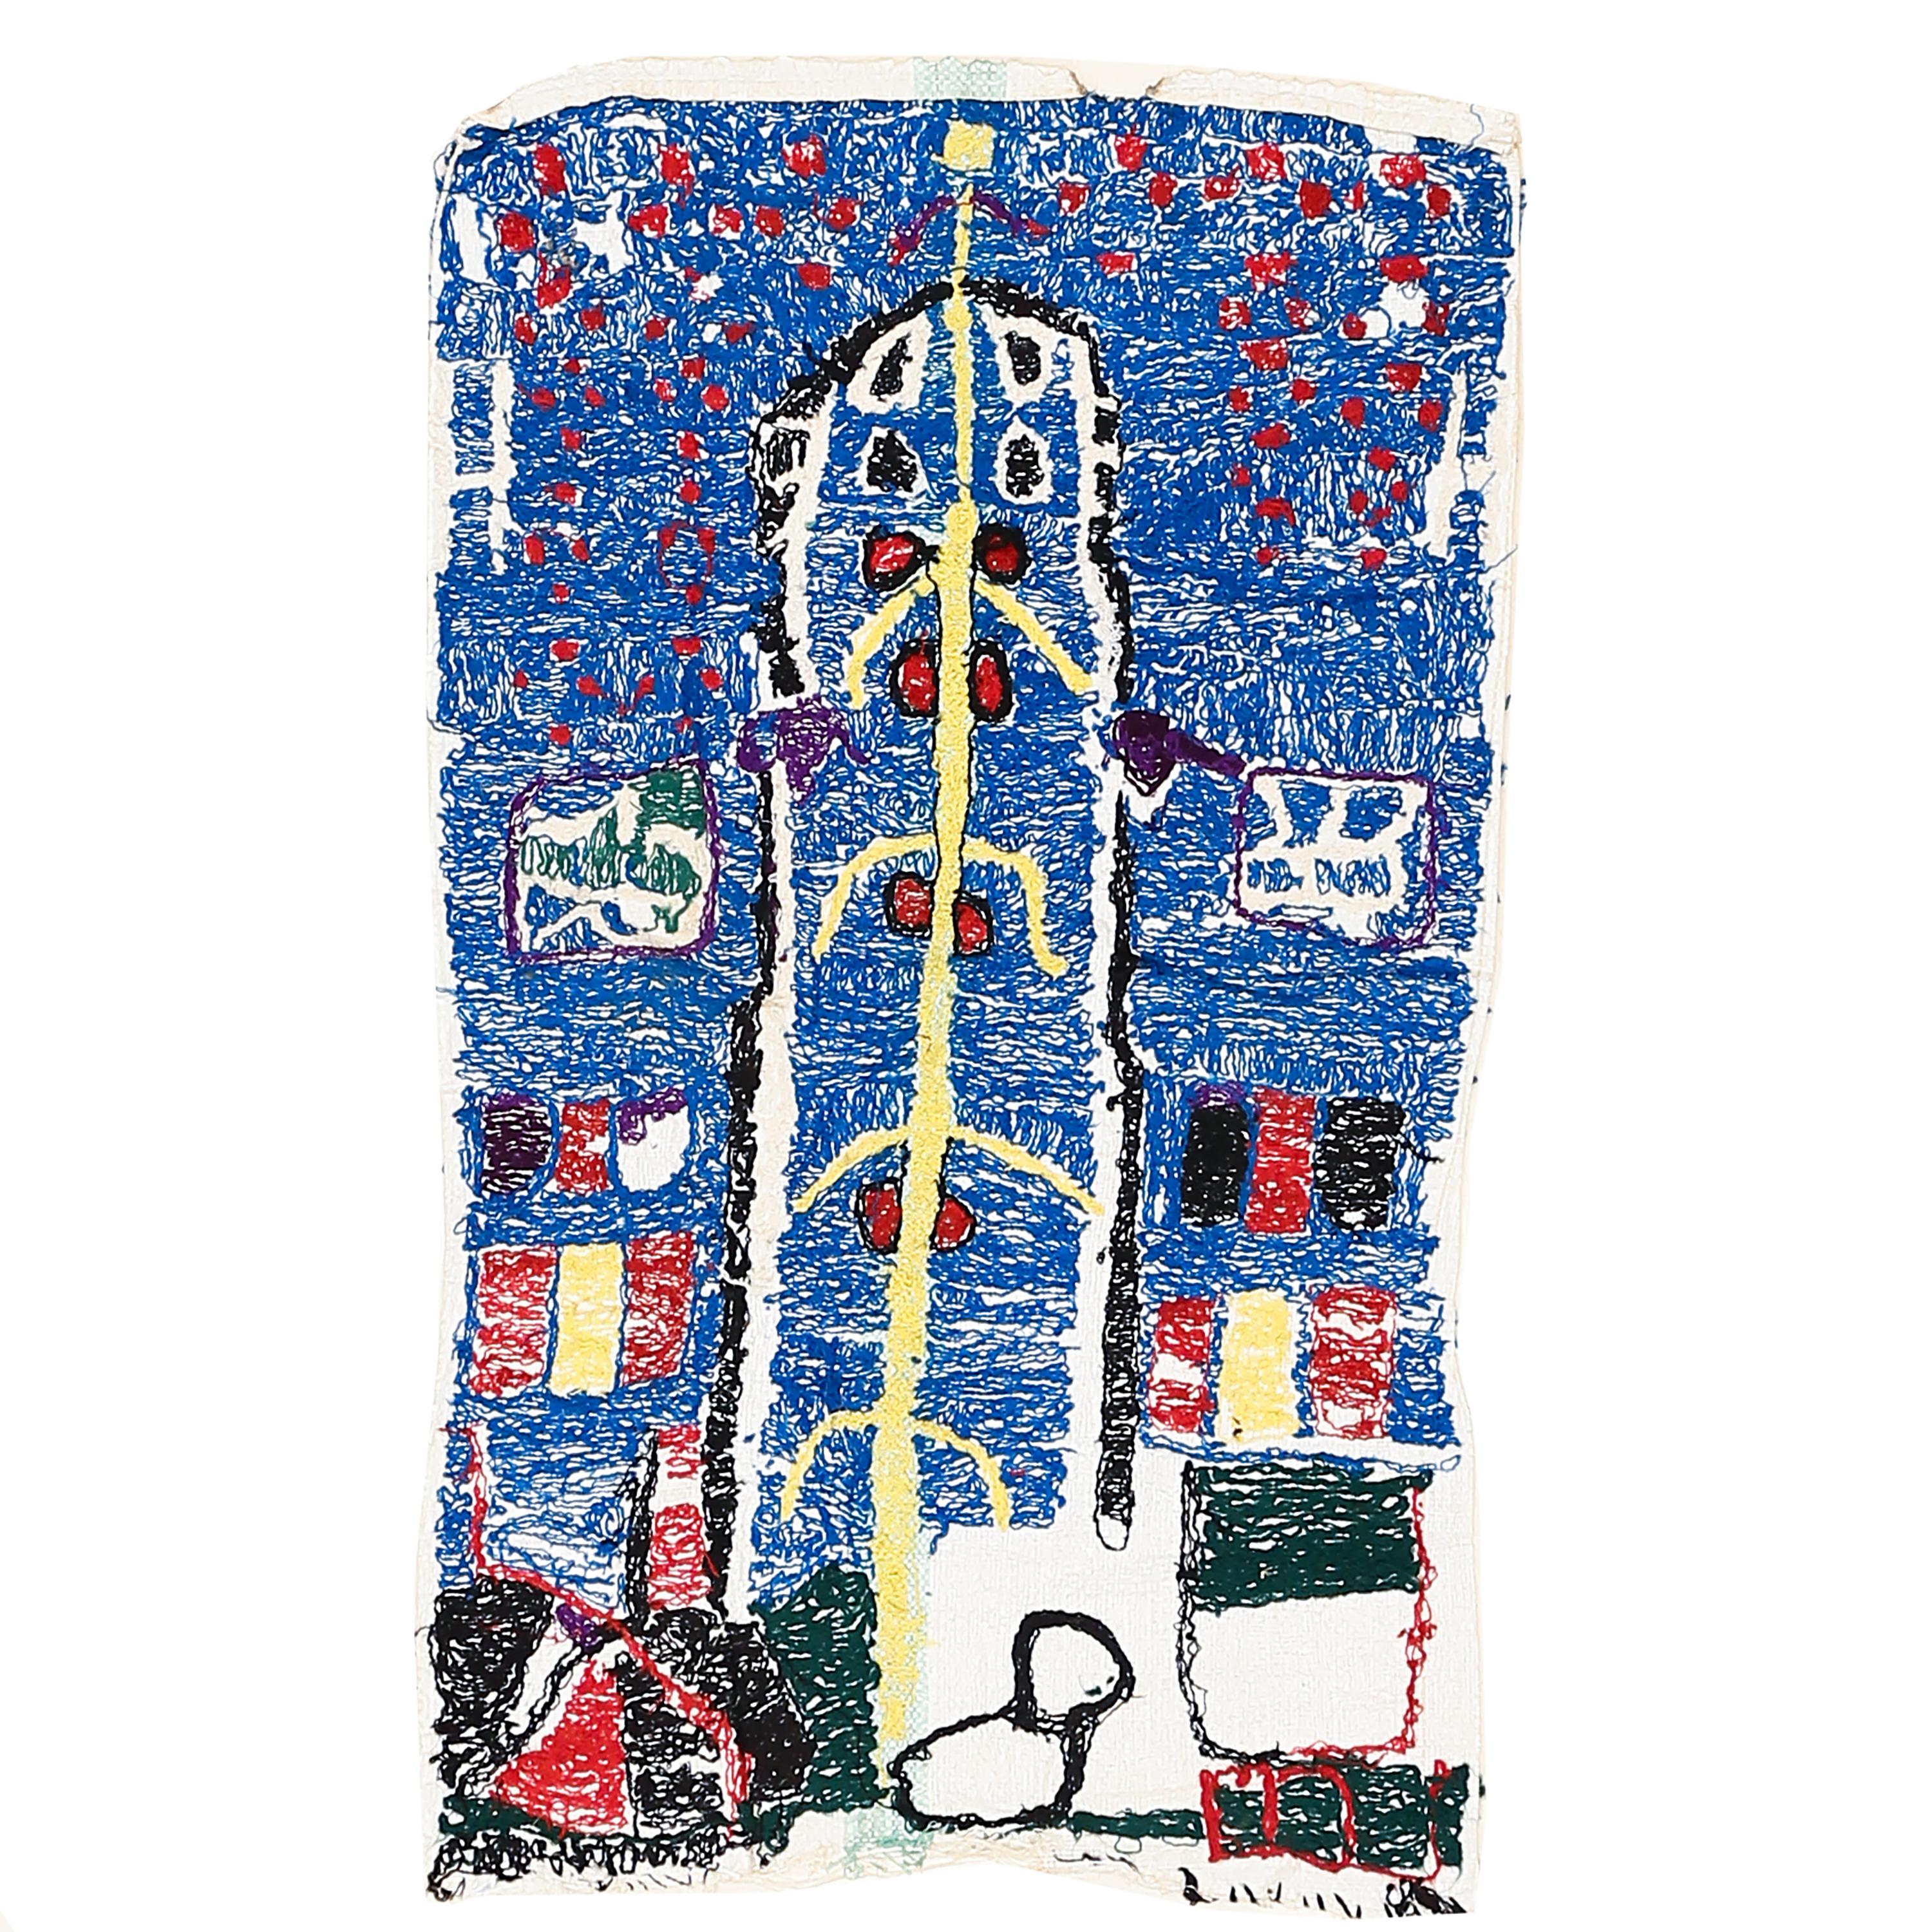 A rare and unusual Moroccan rug woven in the hooked technique using recycled industrial fibres on a plastic foundation. The directional character of the abstract pattern, which seem to indicate a curved central niche containing a tree-like form,